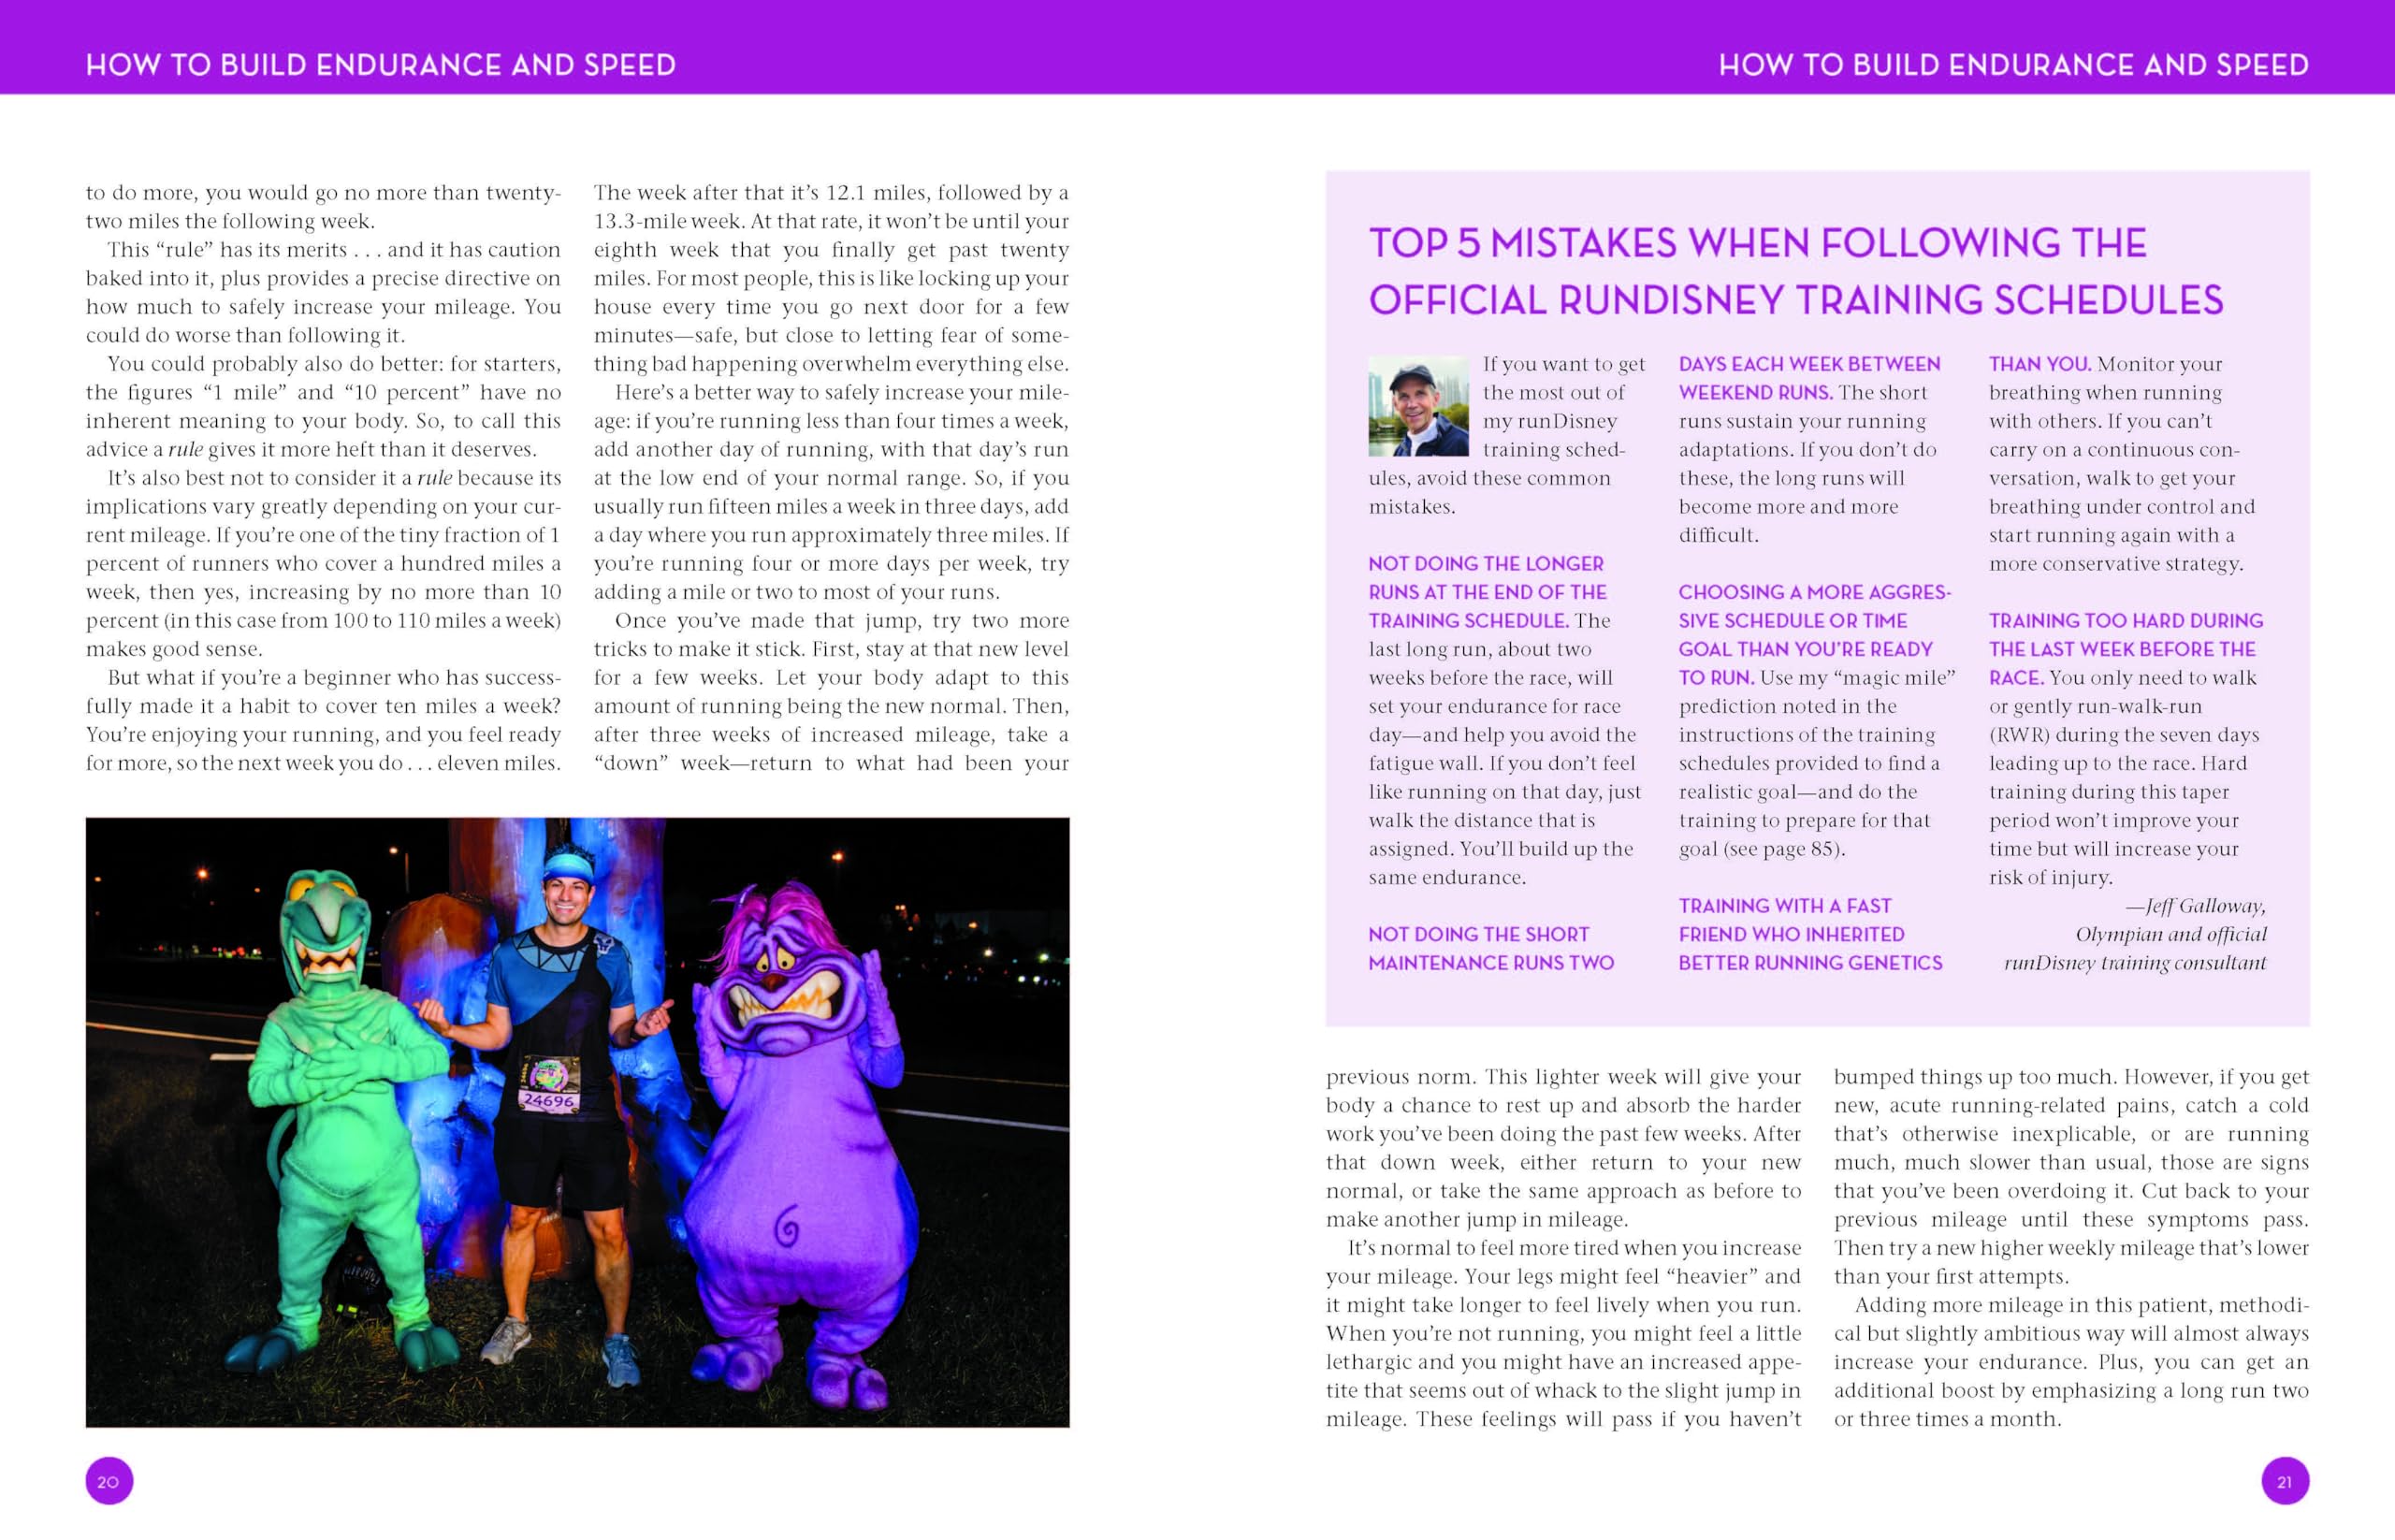 RunDisney: The Official Guide to Racing Around the Parks